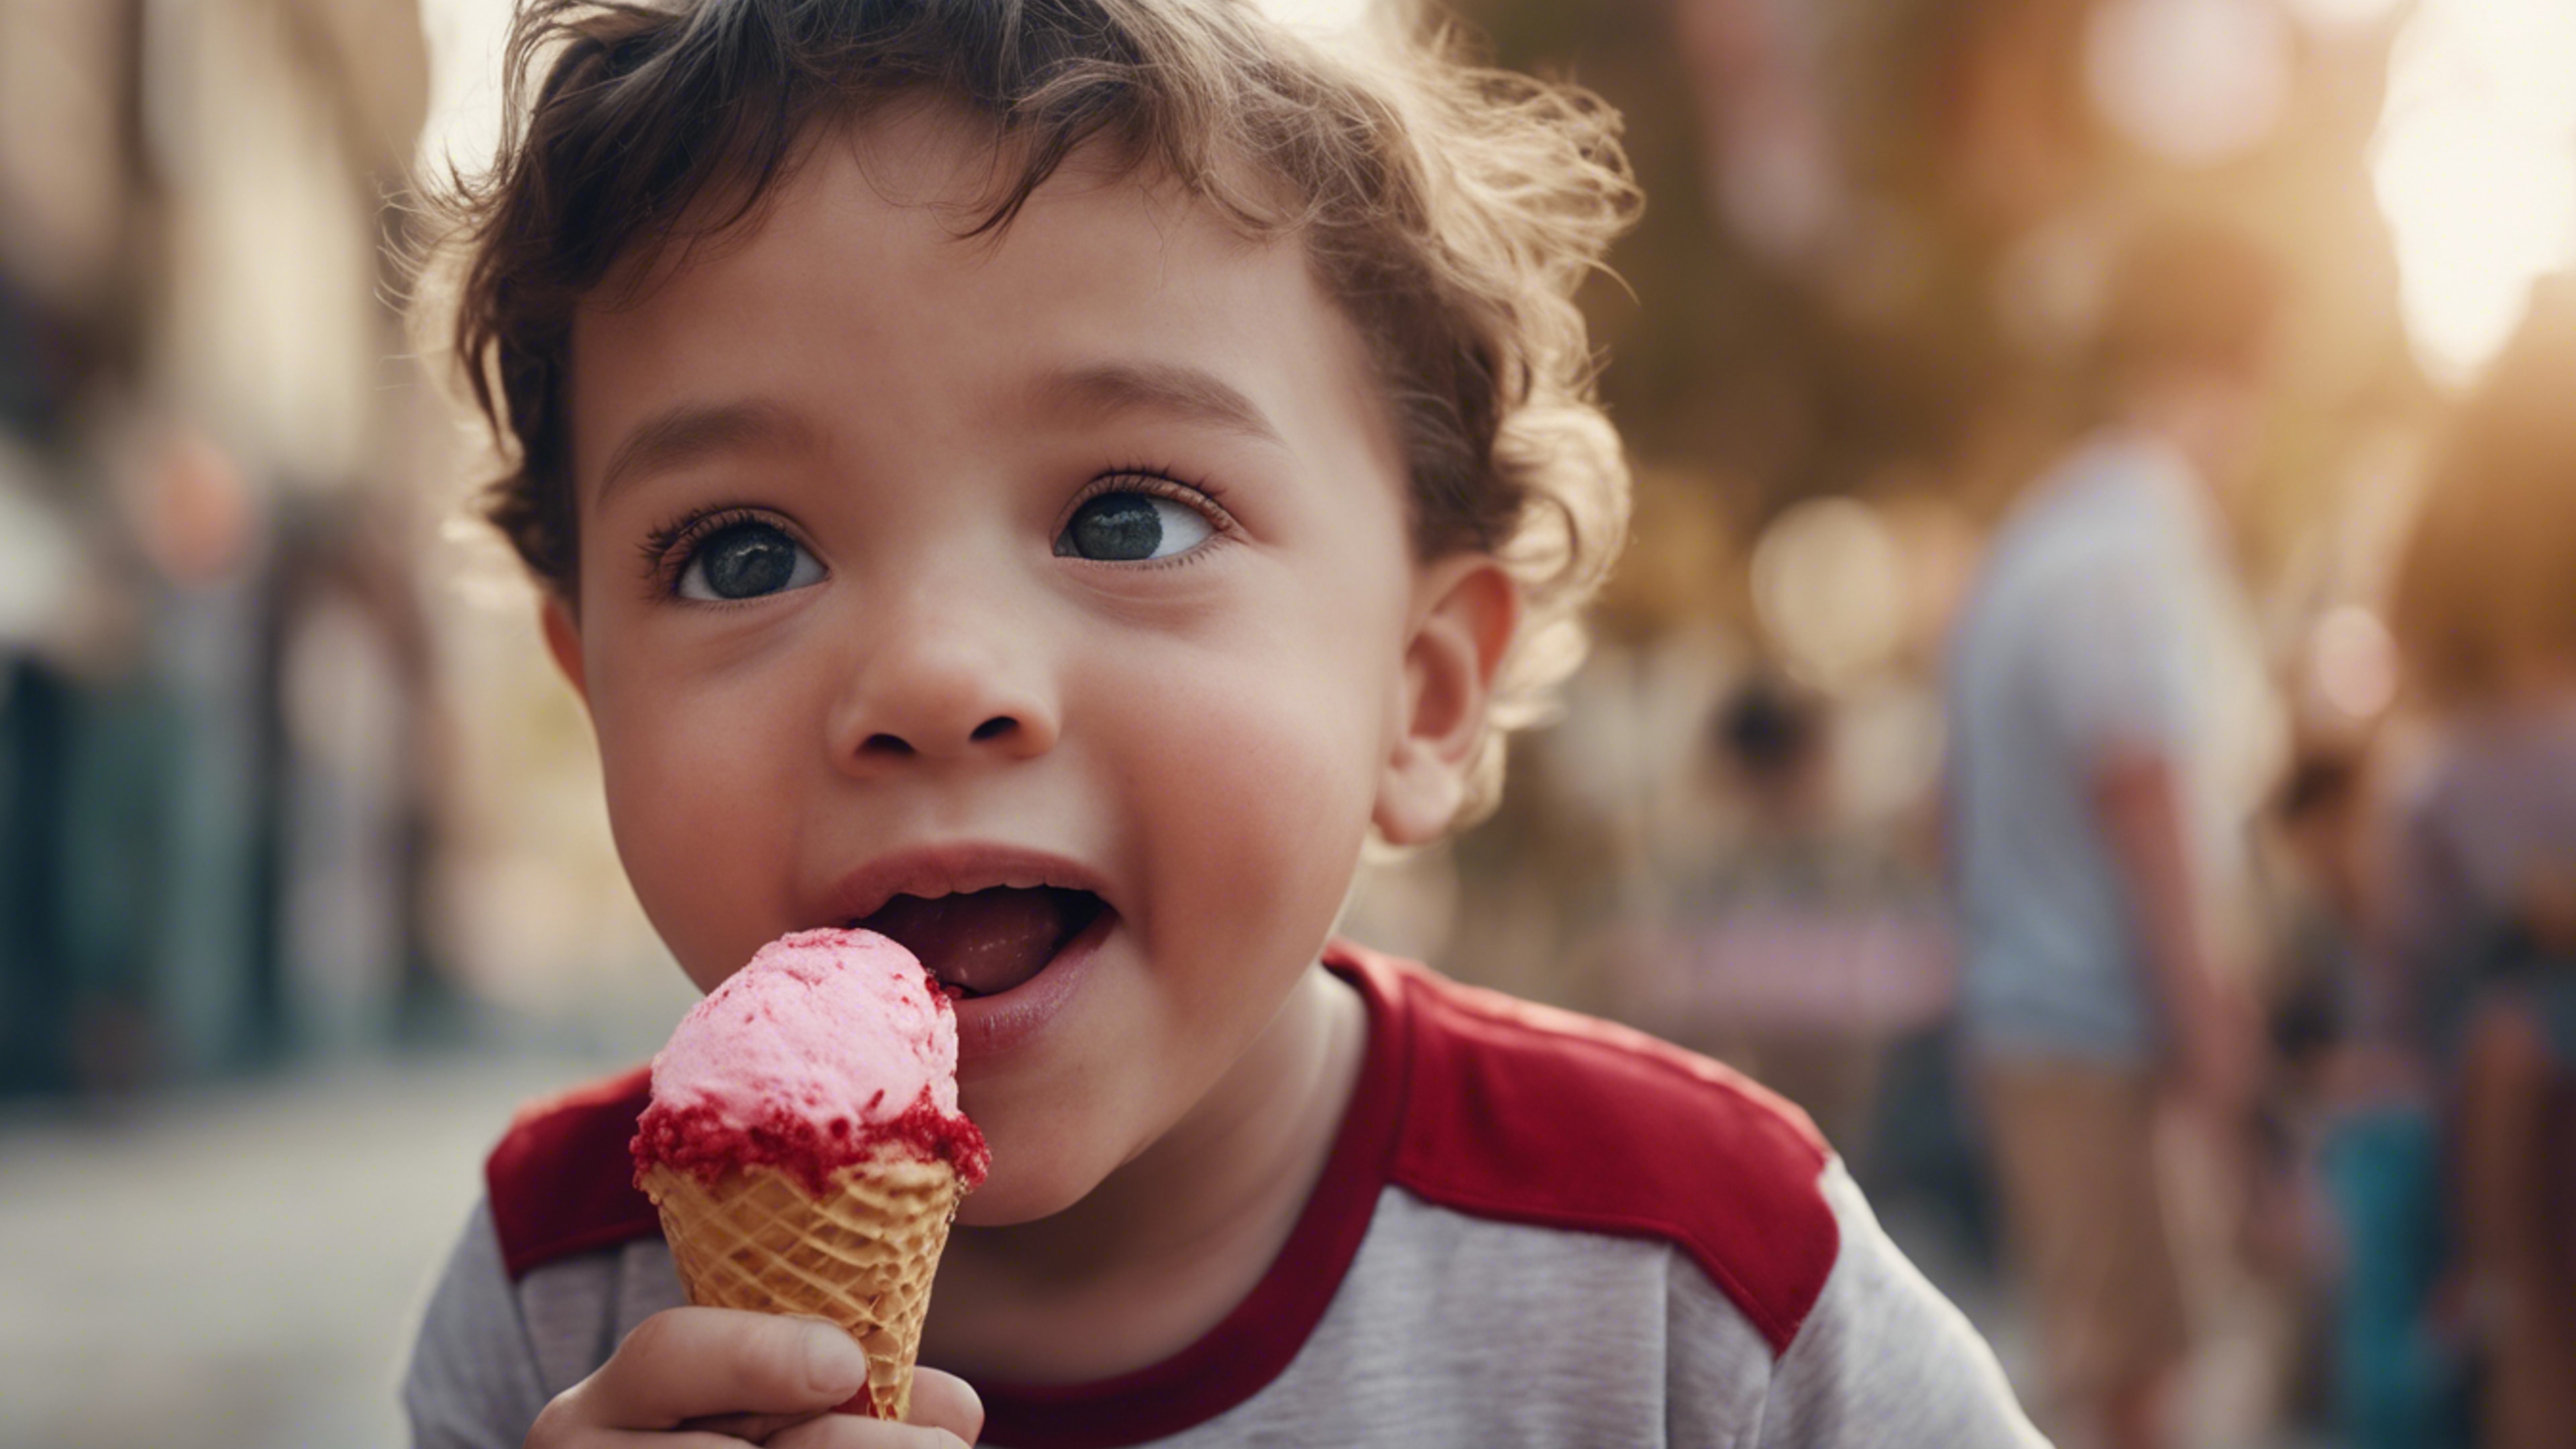 A small child delighting in a red velvet ice cream cone, with a wide-eyed expression of joy on his face. duvar kağıdı[7a3fbd1e60614c42931f]